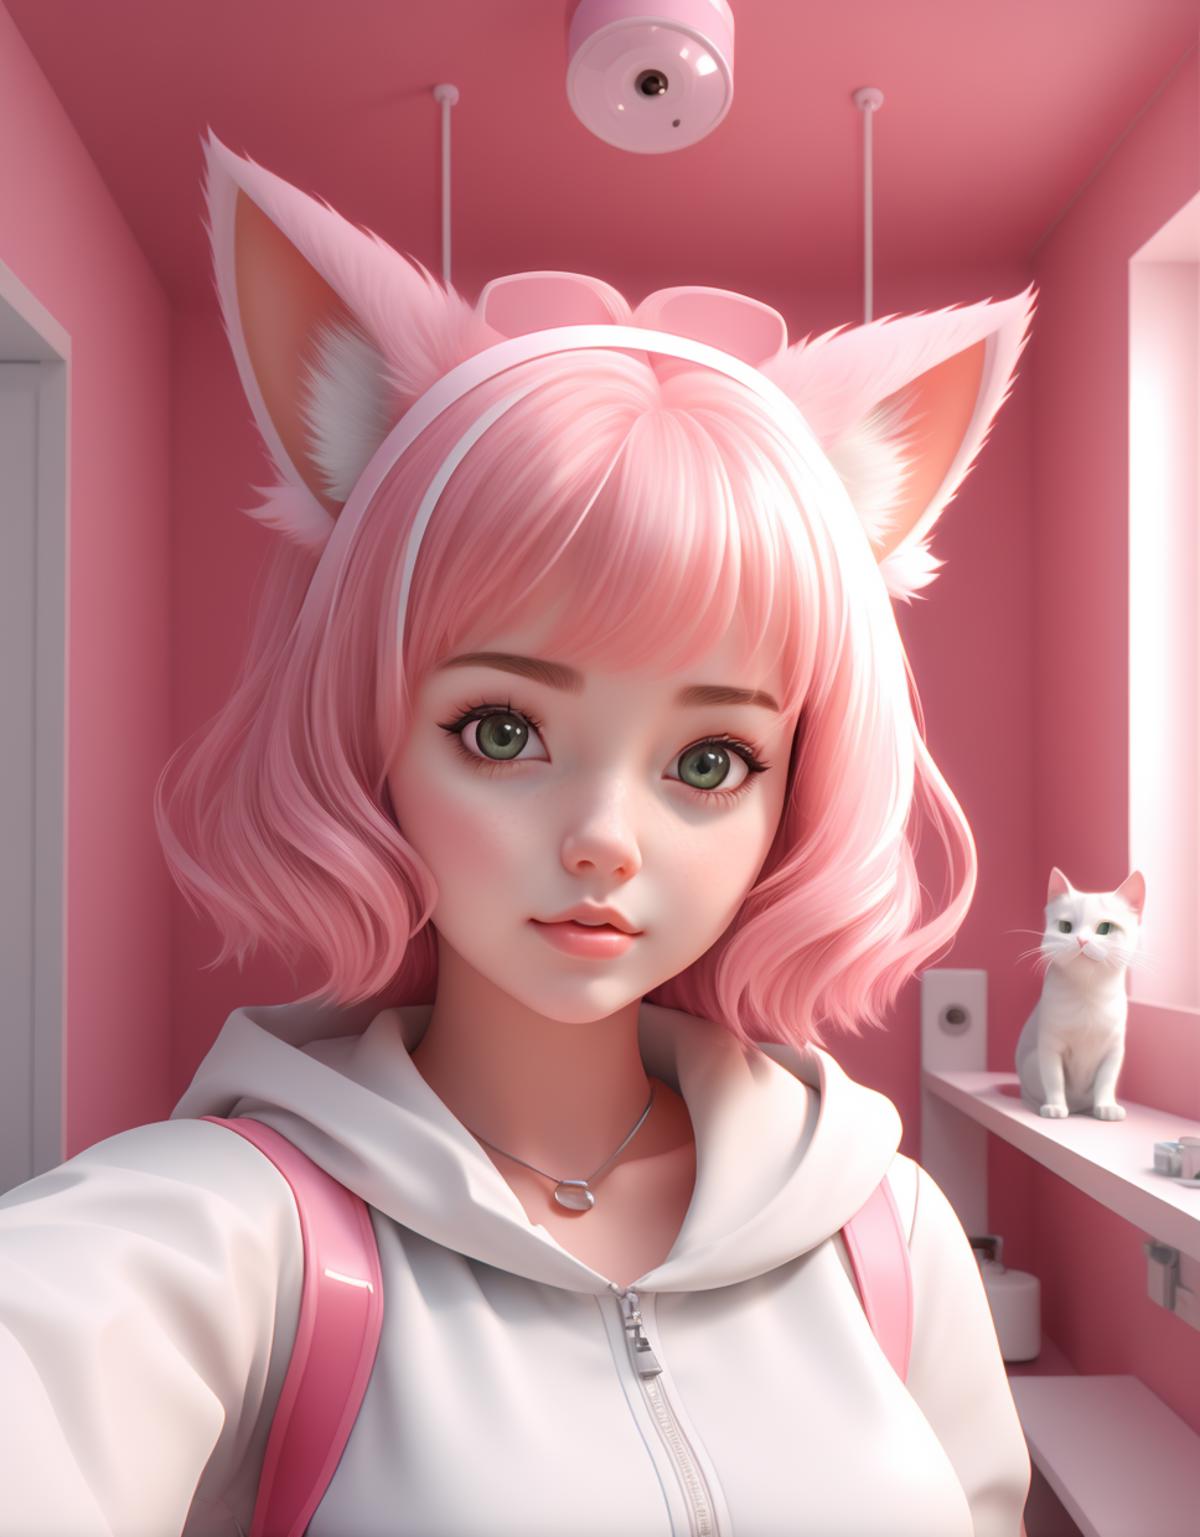 Anime girl with pink hair and pink ears wearing a white hoodie and holding a pink backpack.